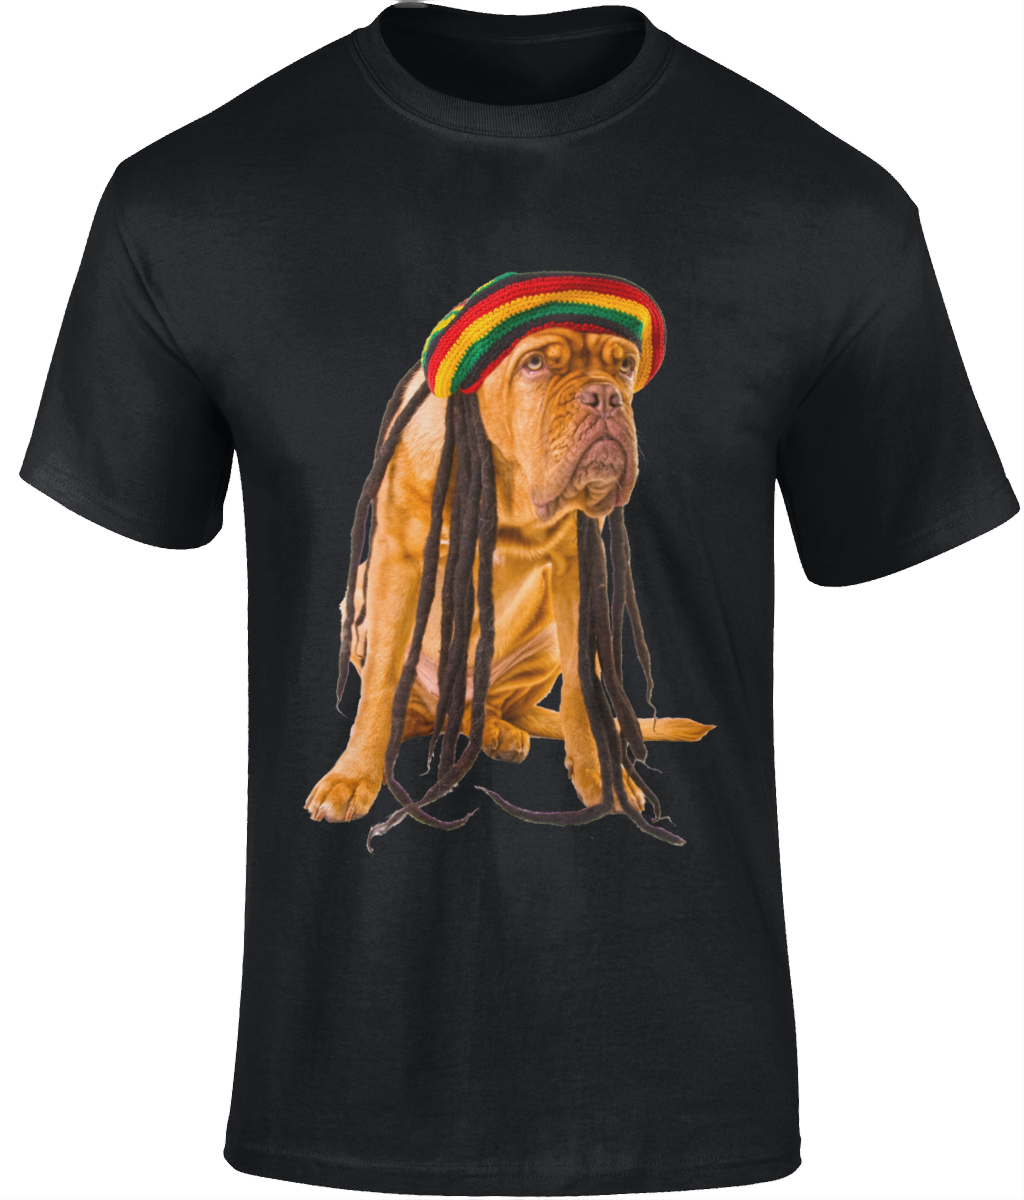 Men's Rasta Dog T-Shirt Design A - Various Colours Available - FAST UK DELIVERY